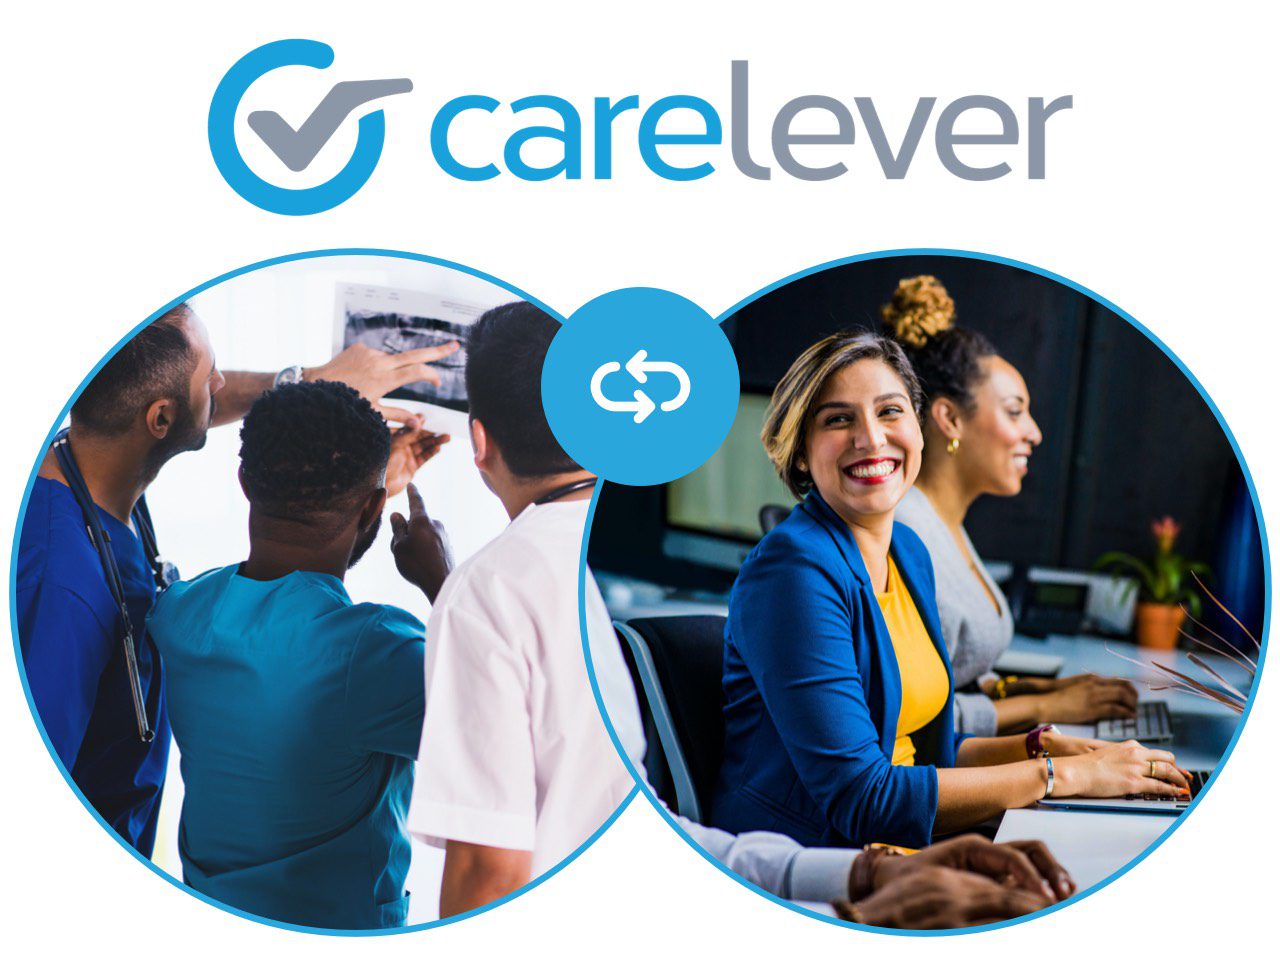 Our story - Carlever team experience